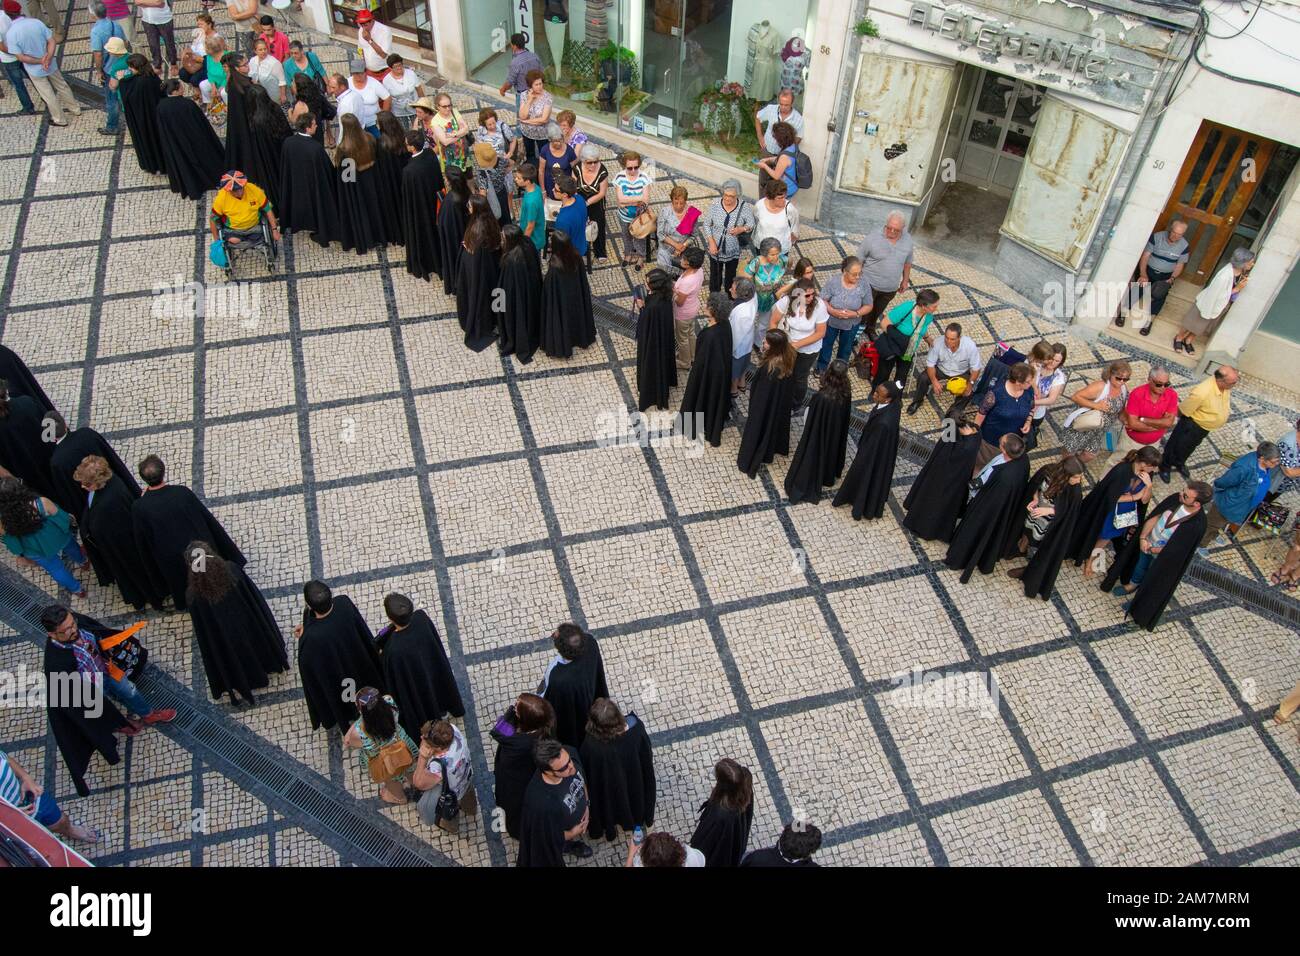 COIMBRA, PORTUGAL - 10 Jul 2016 - People in the parade in commemoration of the 500th anniversary of the Queen Saint of Coimbra Portugal Stock Photo